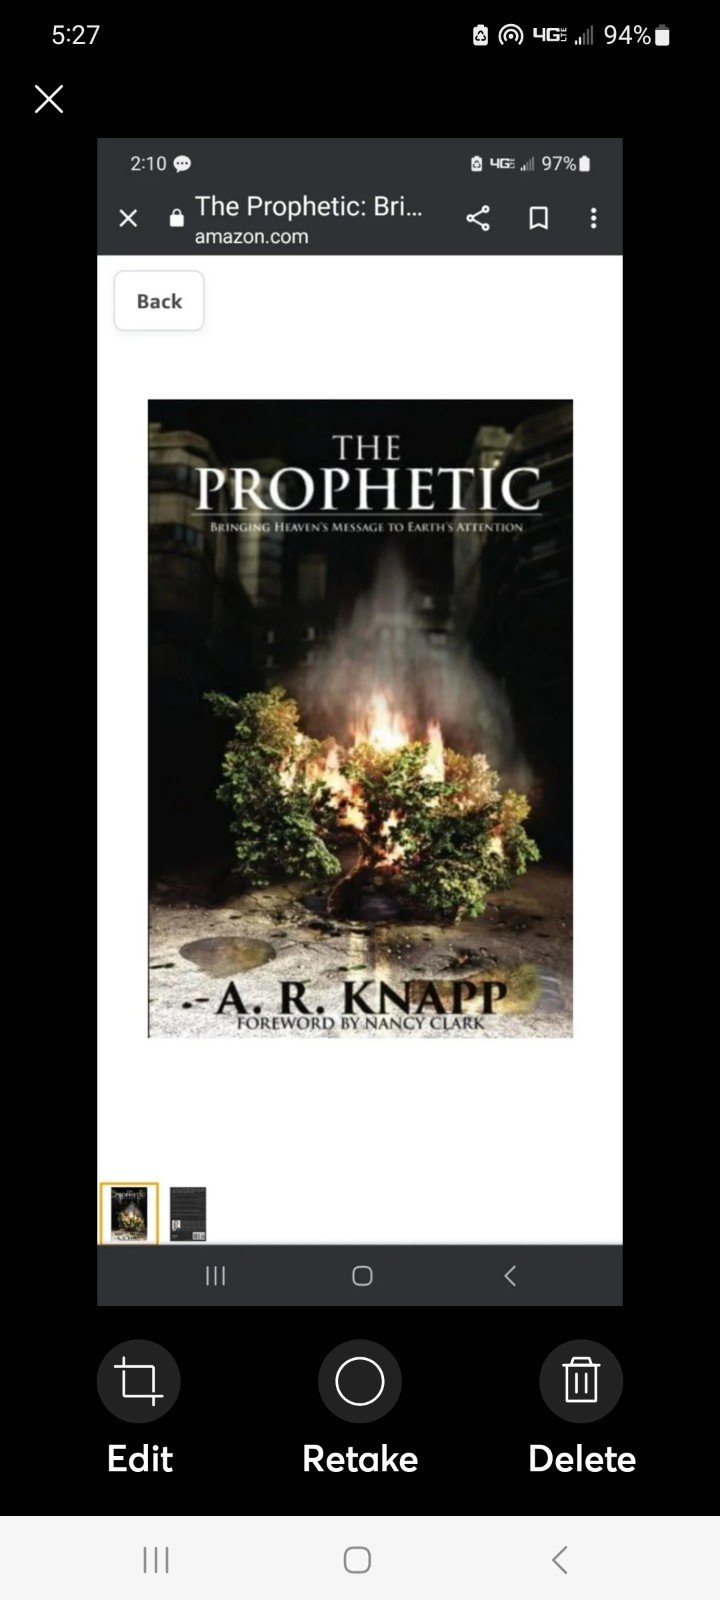 THE PROPHETIC BY A.R. KNAPP

Like new L8BVOkwbH